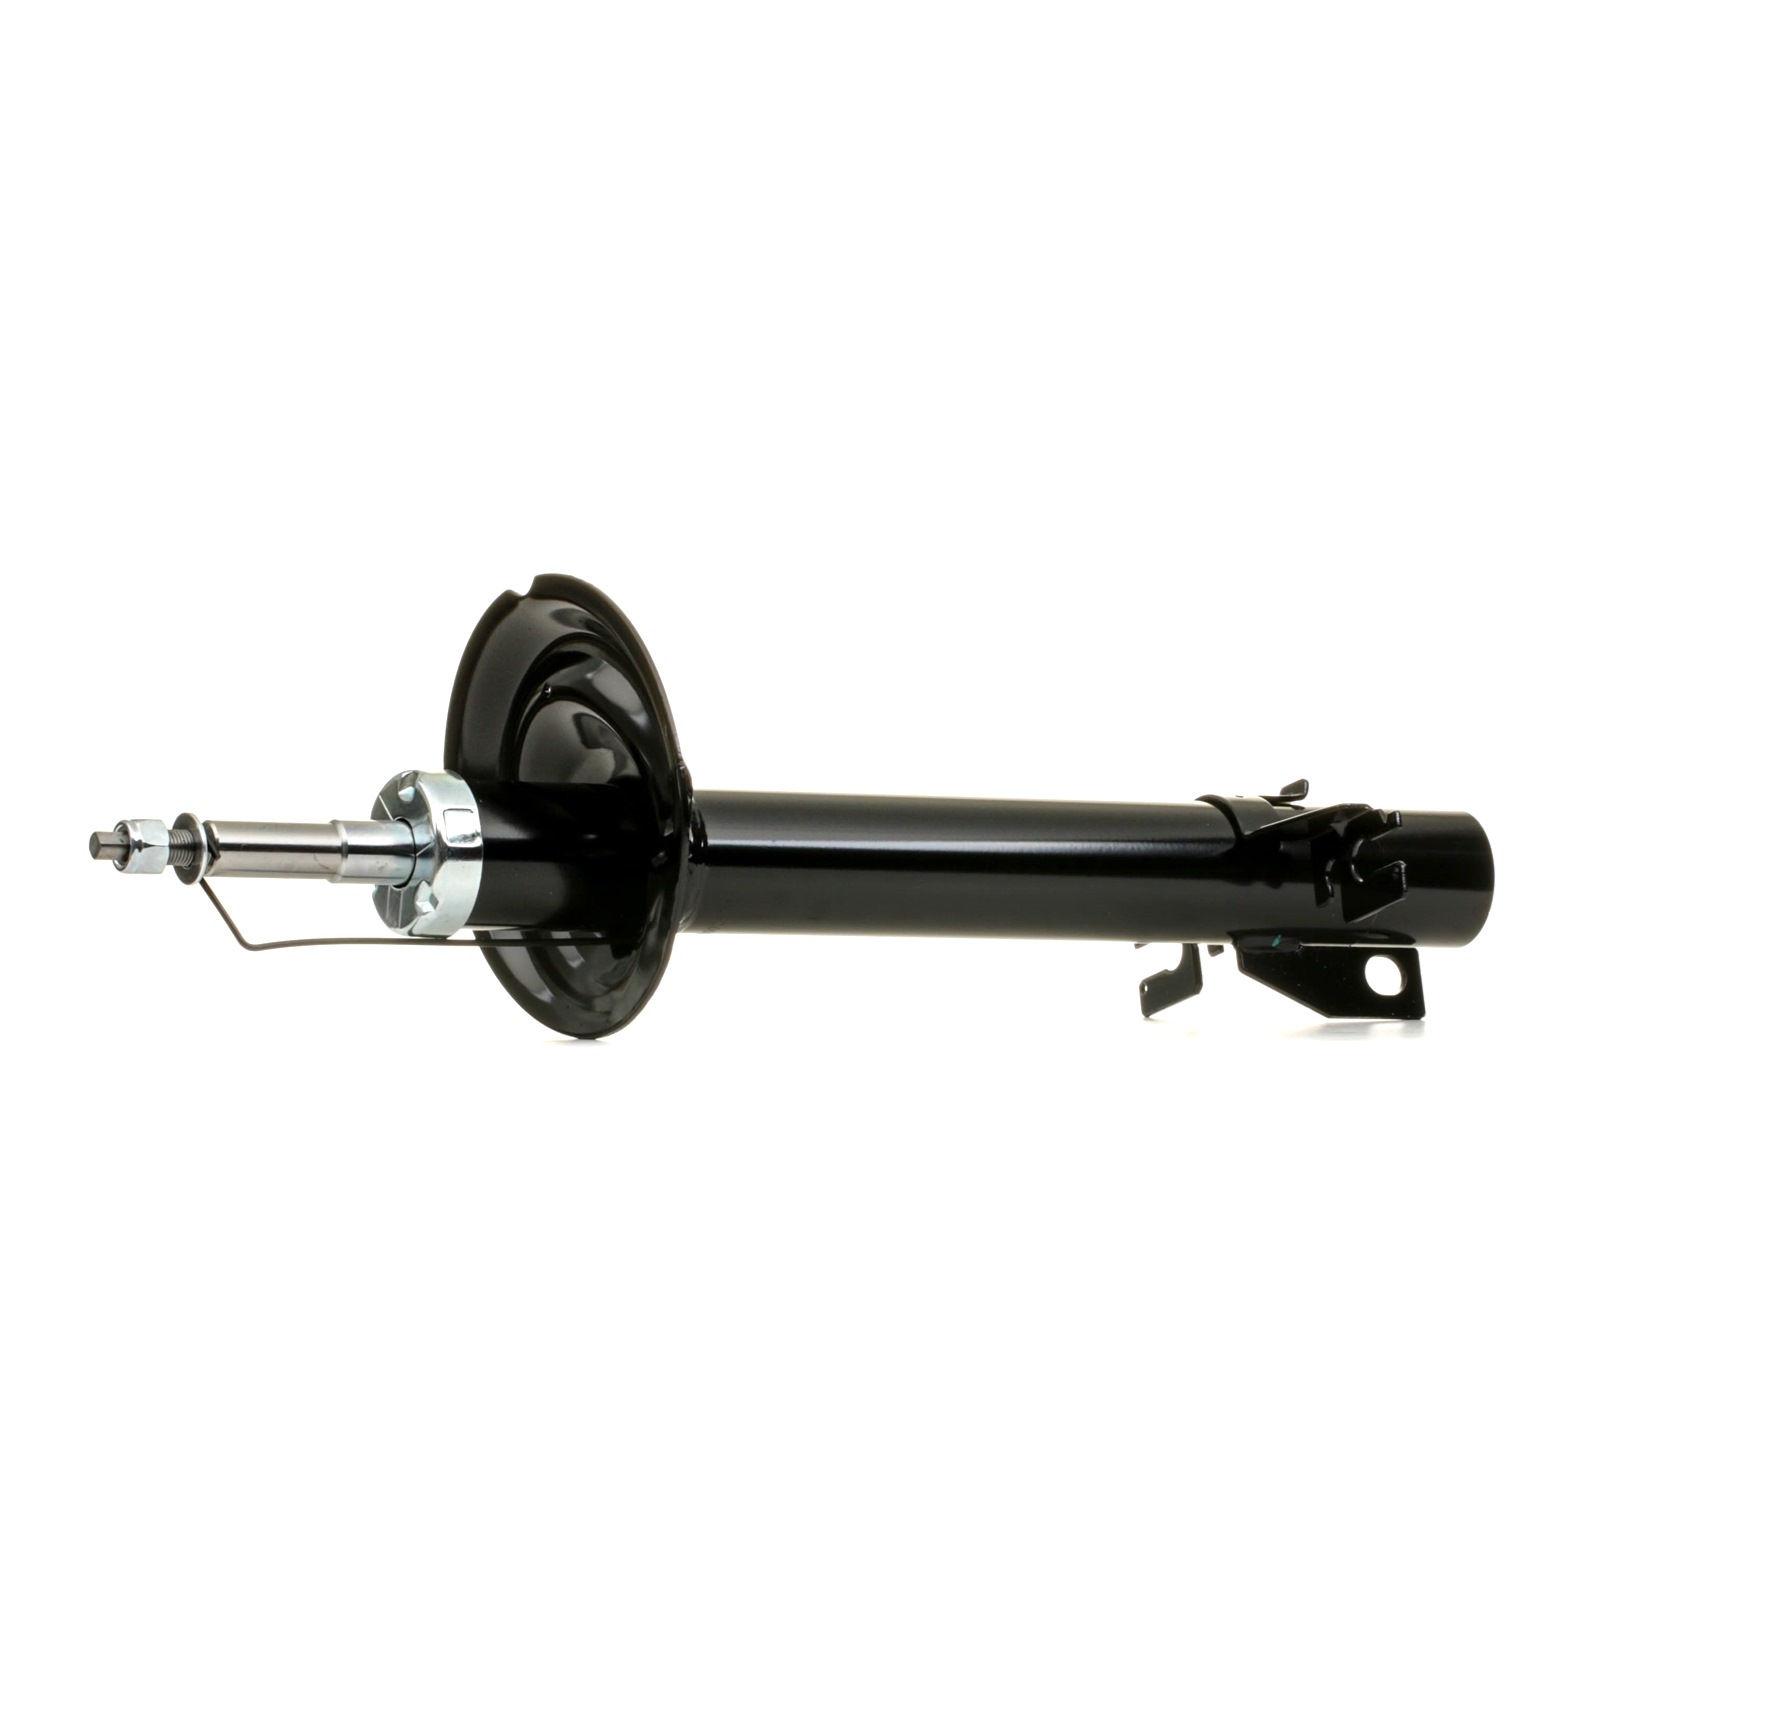 Buy Shock absorber RIDEX 854S0874 - Damping parts Fiat Ducato 244 online